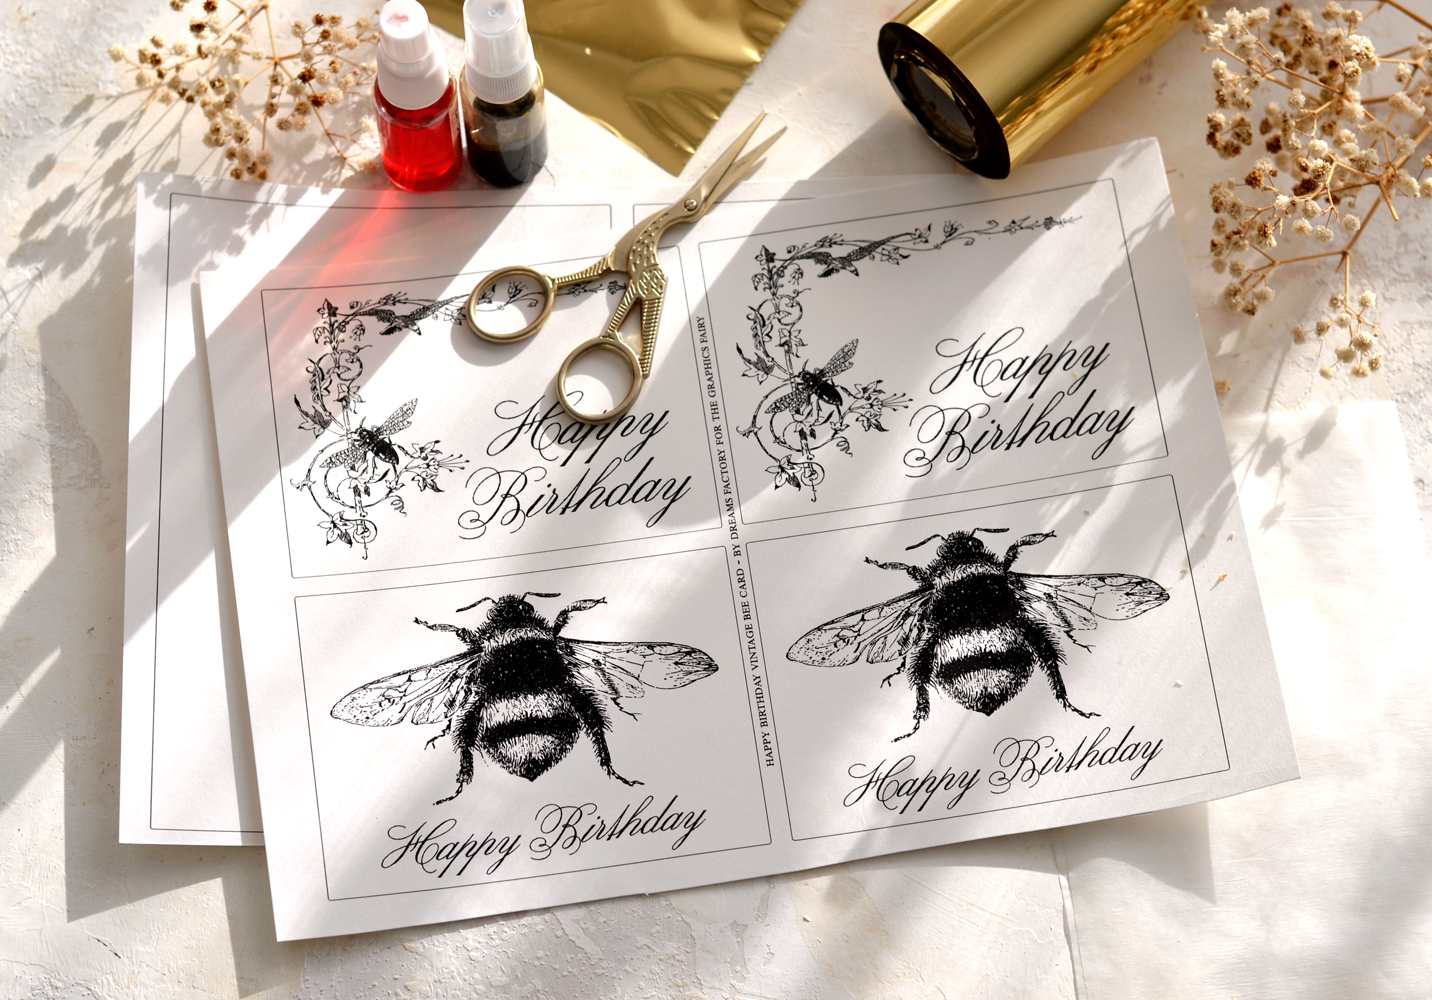 The supplies for making the vintage bee birthday cards